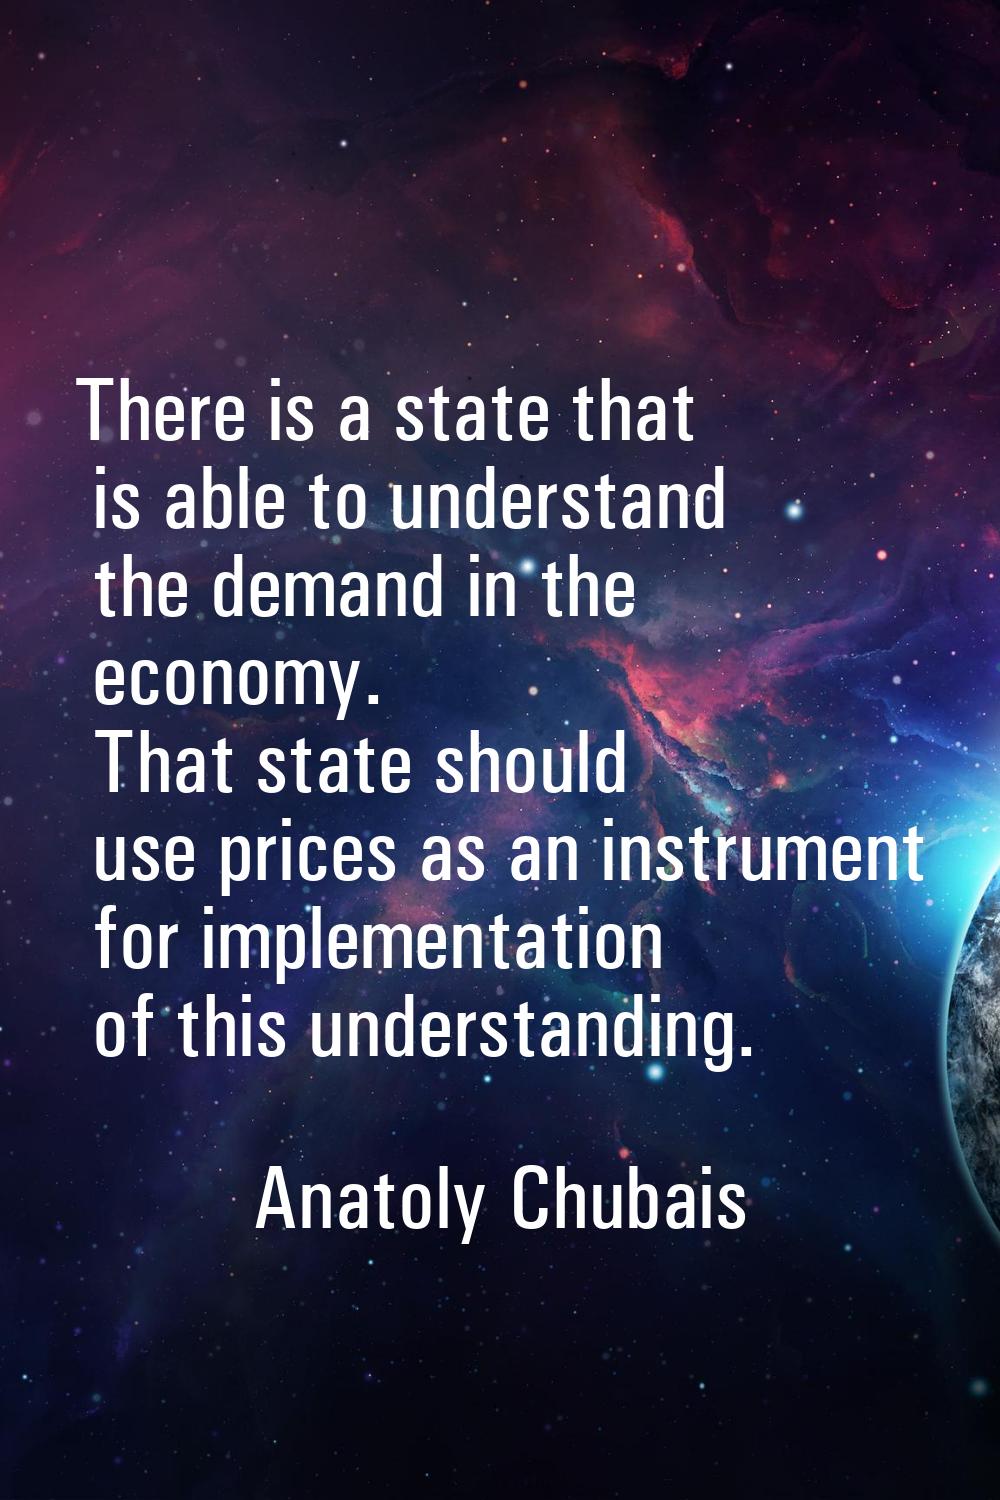 There is a state that is able to understand the demand in the economy. That state should use prices